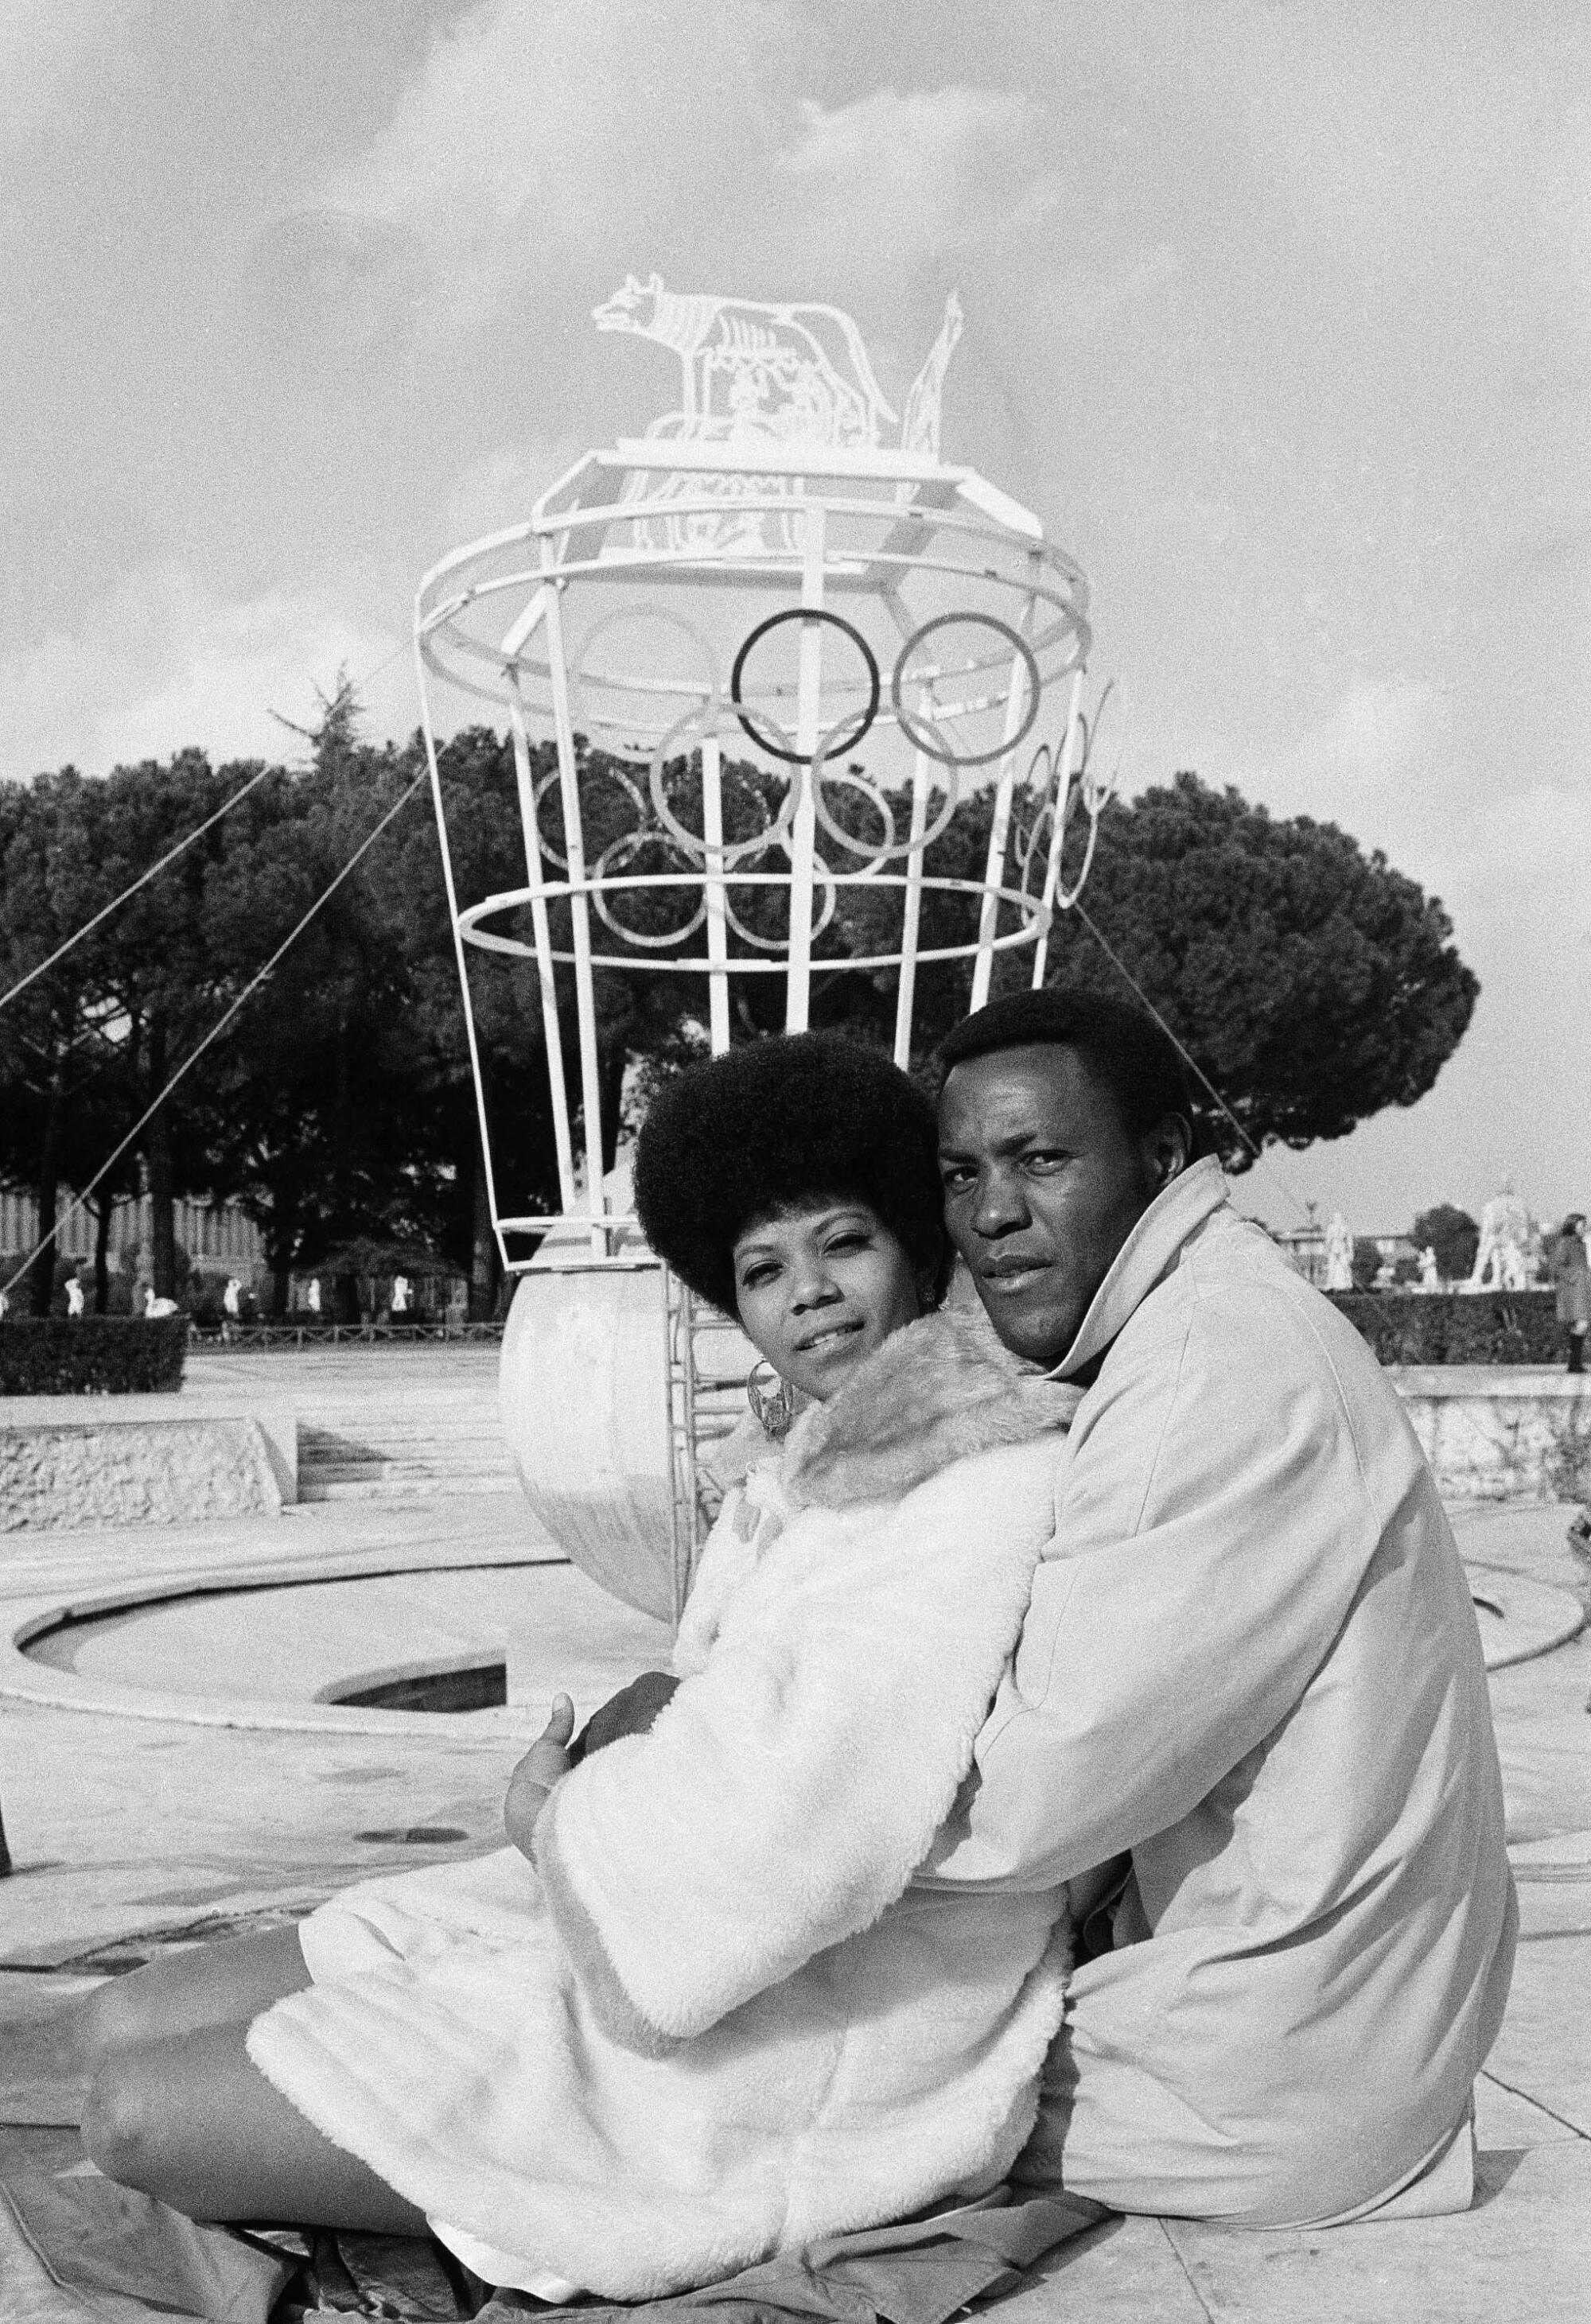 Wilma Rudolph and Rafer Johnson on the set of "The Games" at Rome's Olympic Stadium on March 24, 1969.